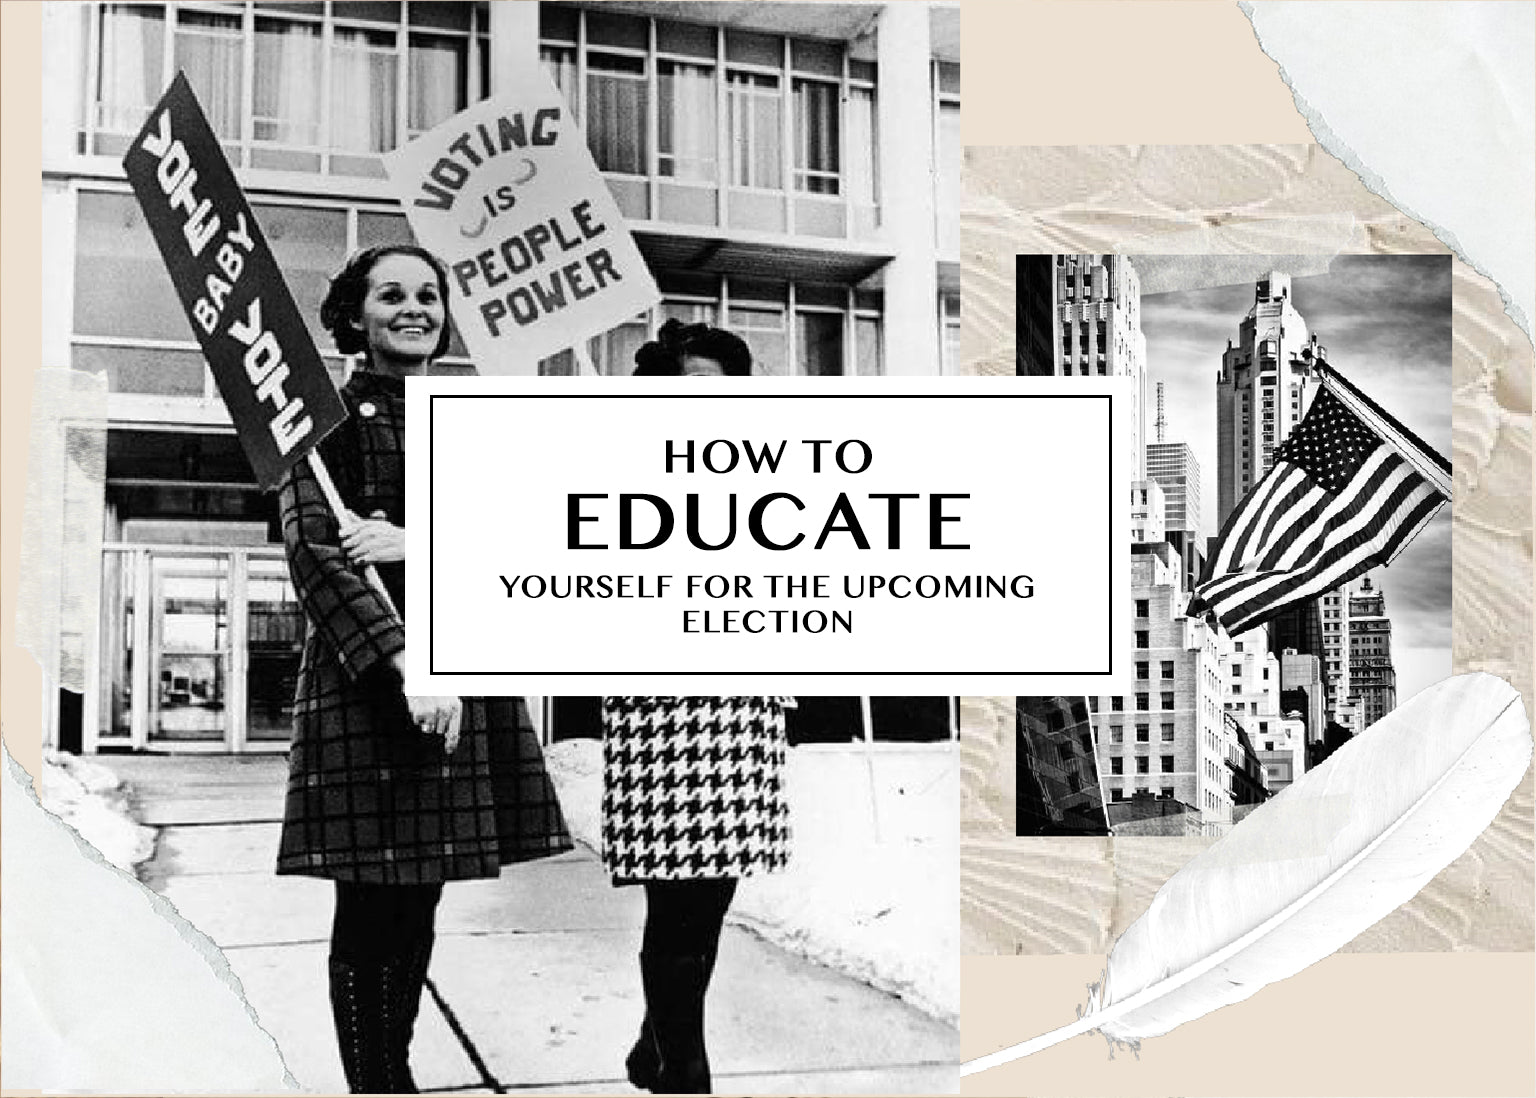 How to Educate Yourself for the Upcoming Election